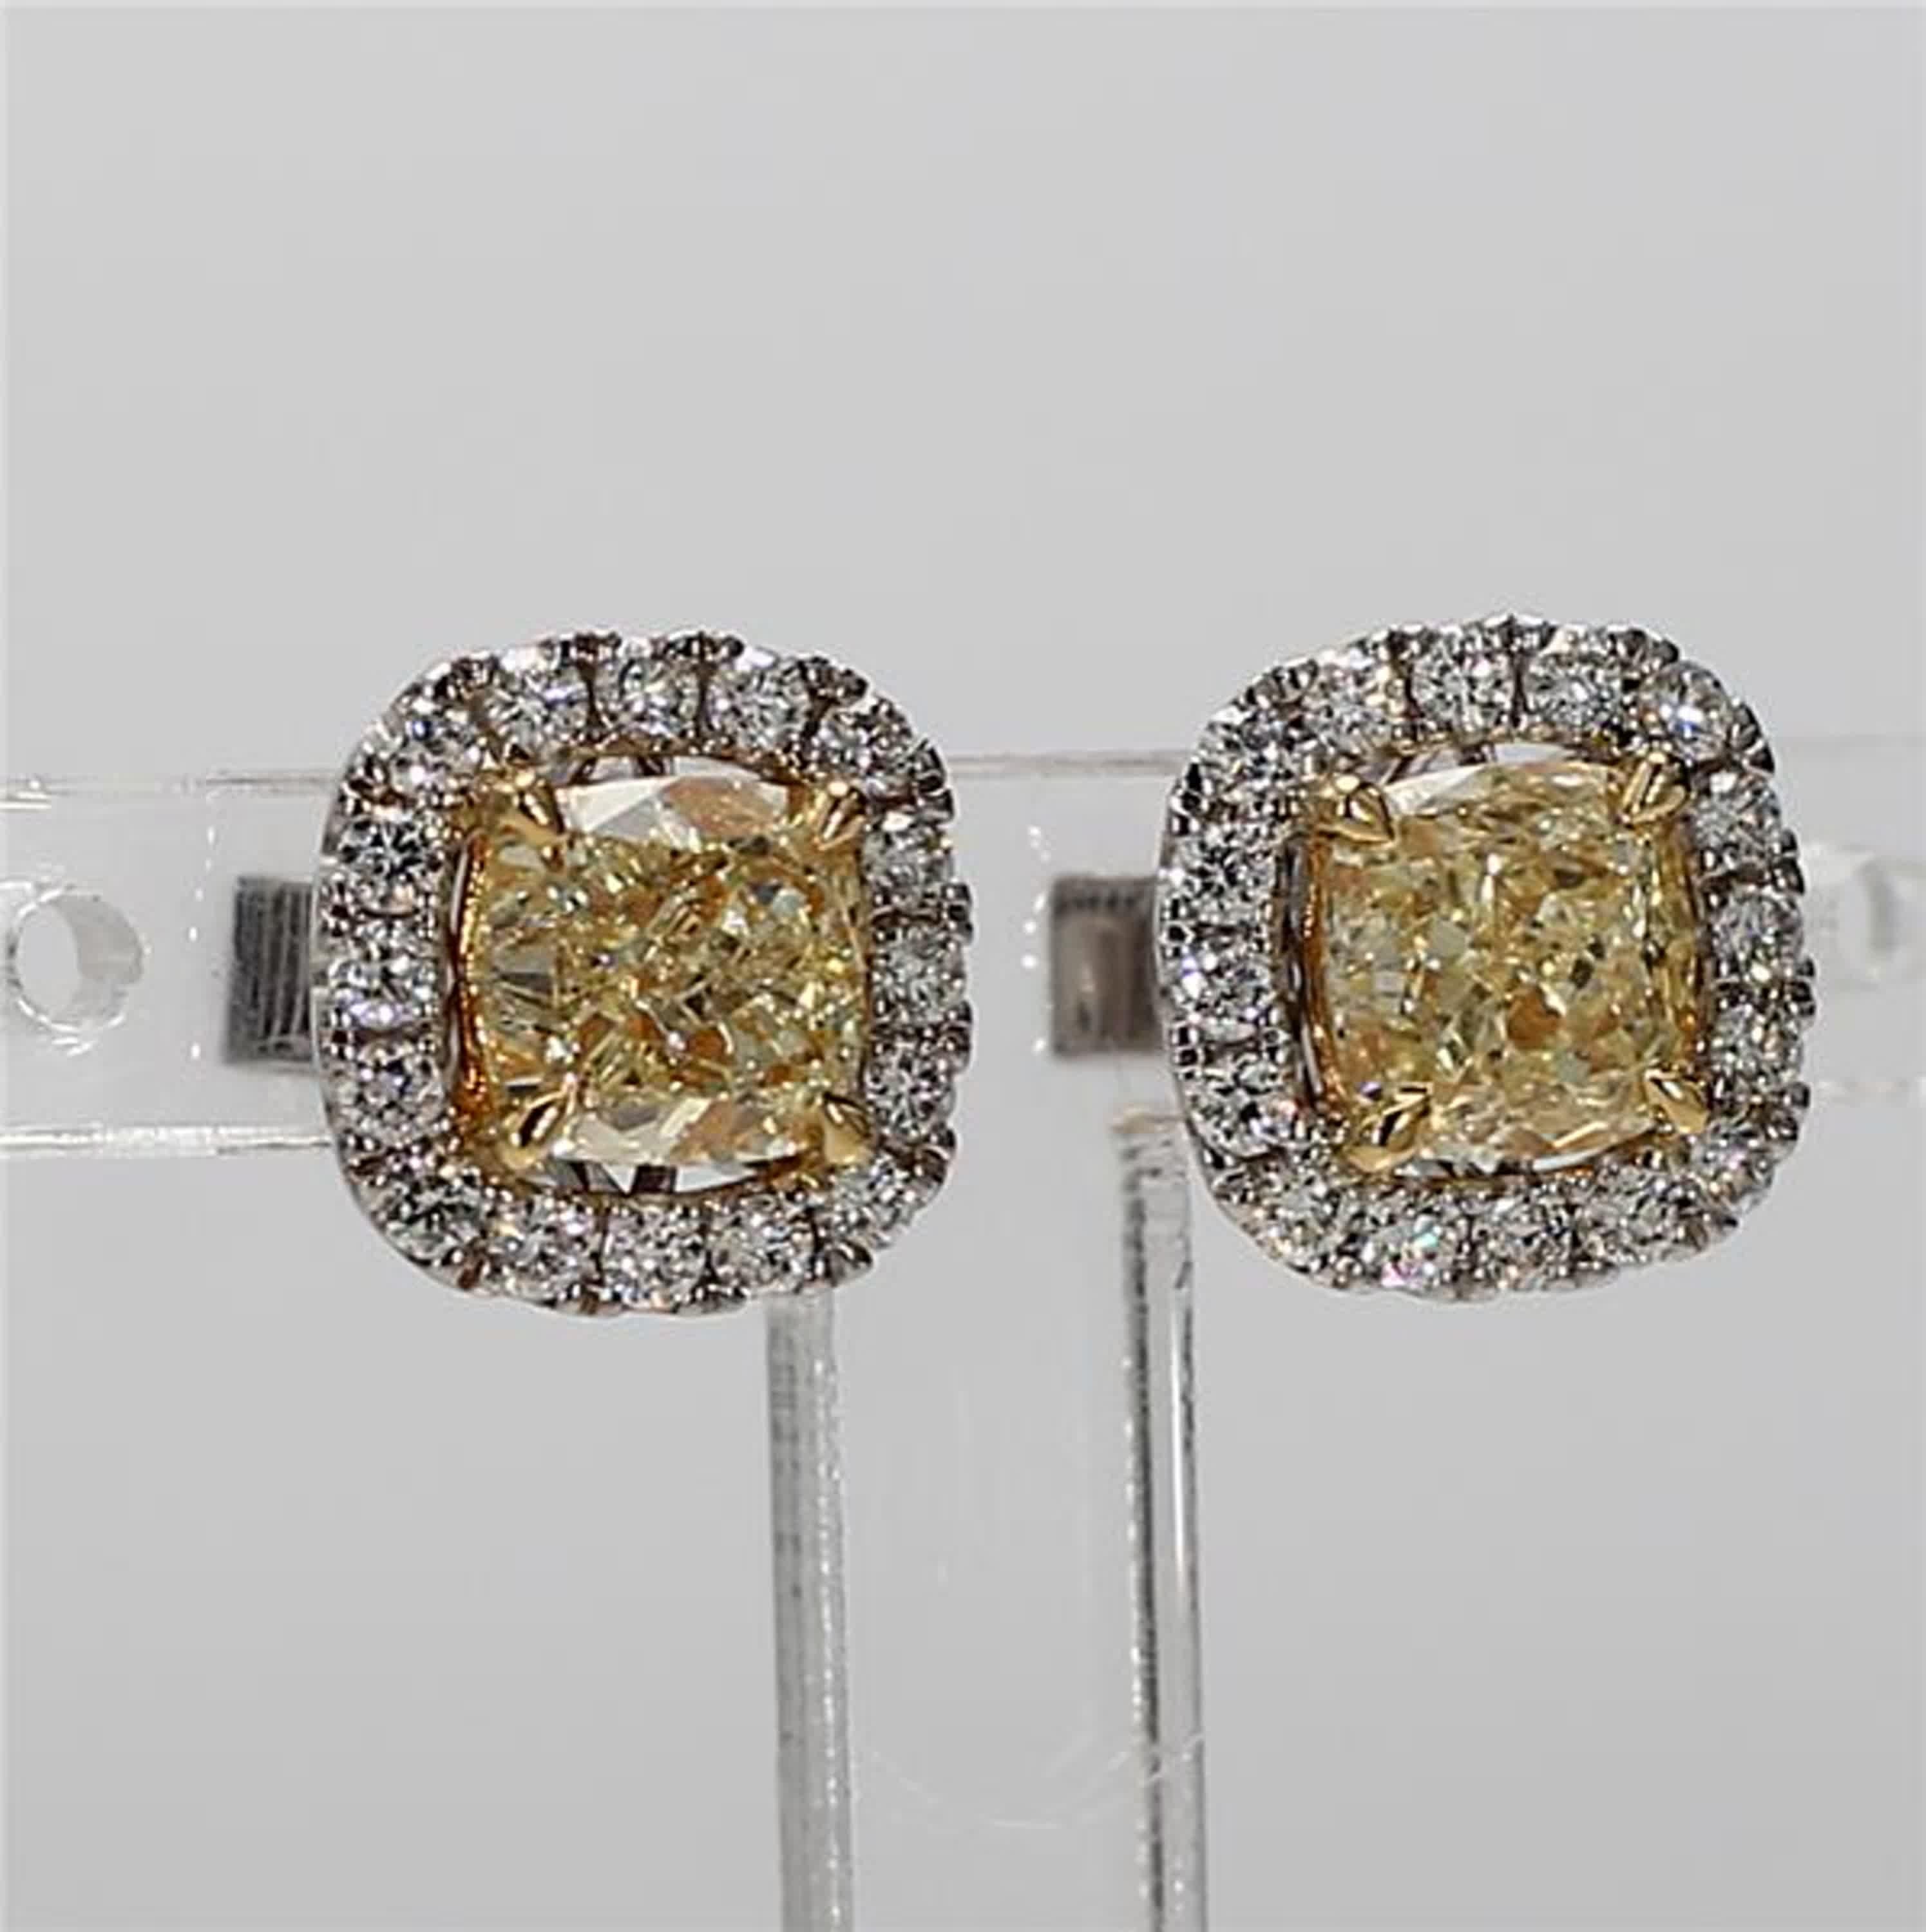 Cushion Cut Natural Yellow Cushions and White Diamond 1.72 Carat TW Gold Stud Earrings